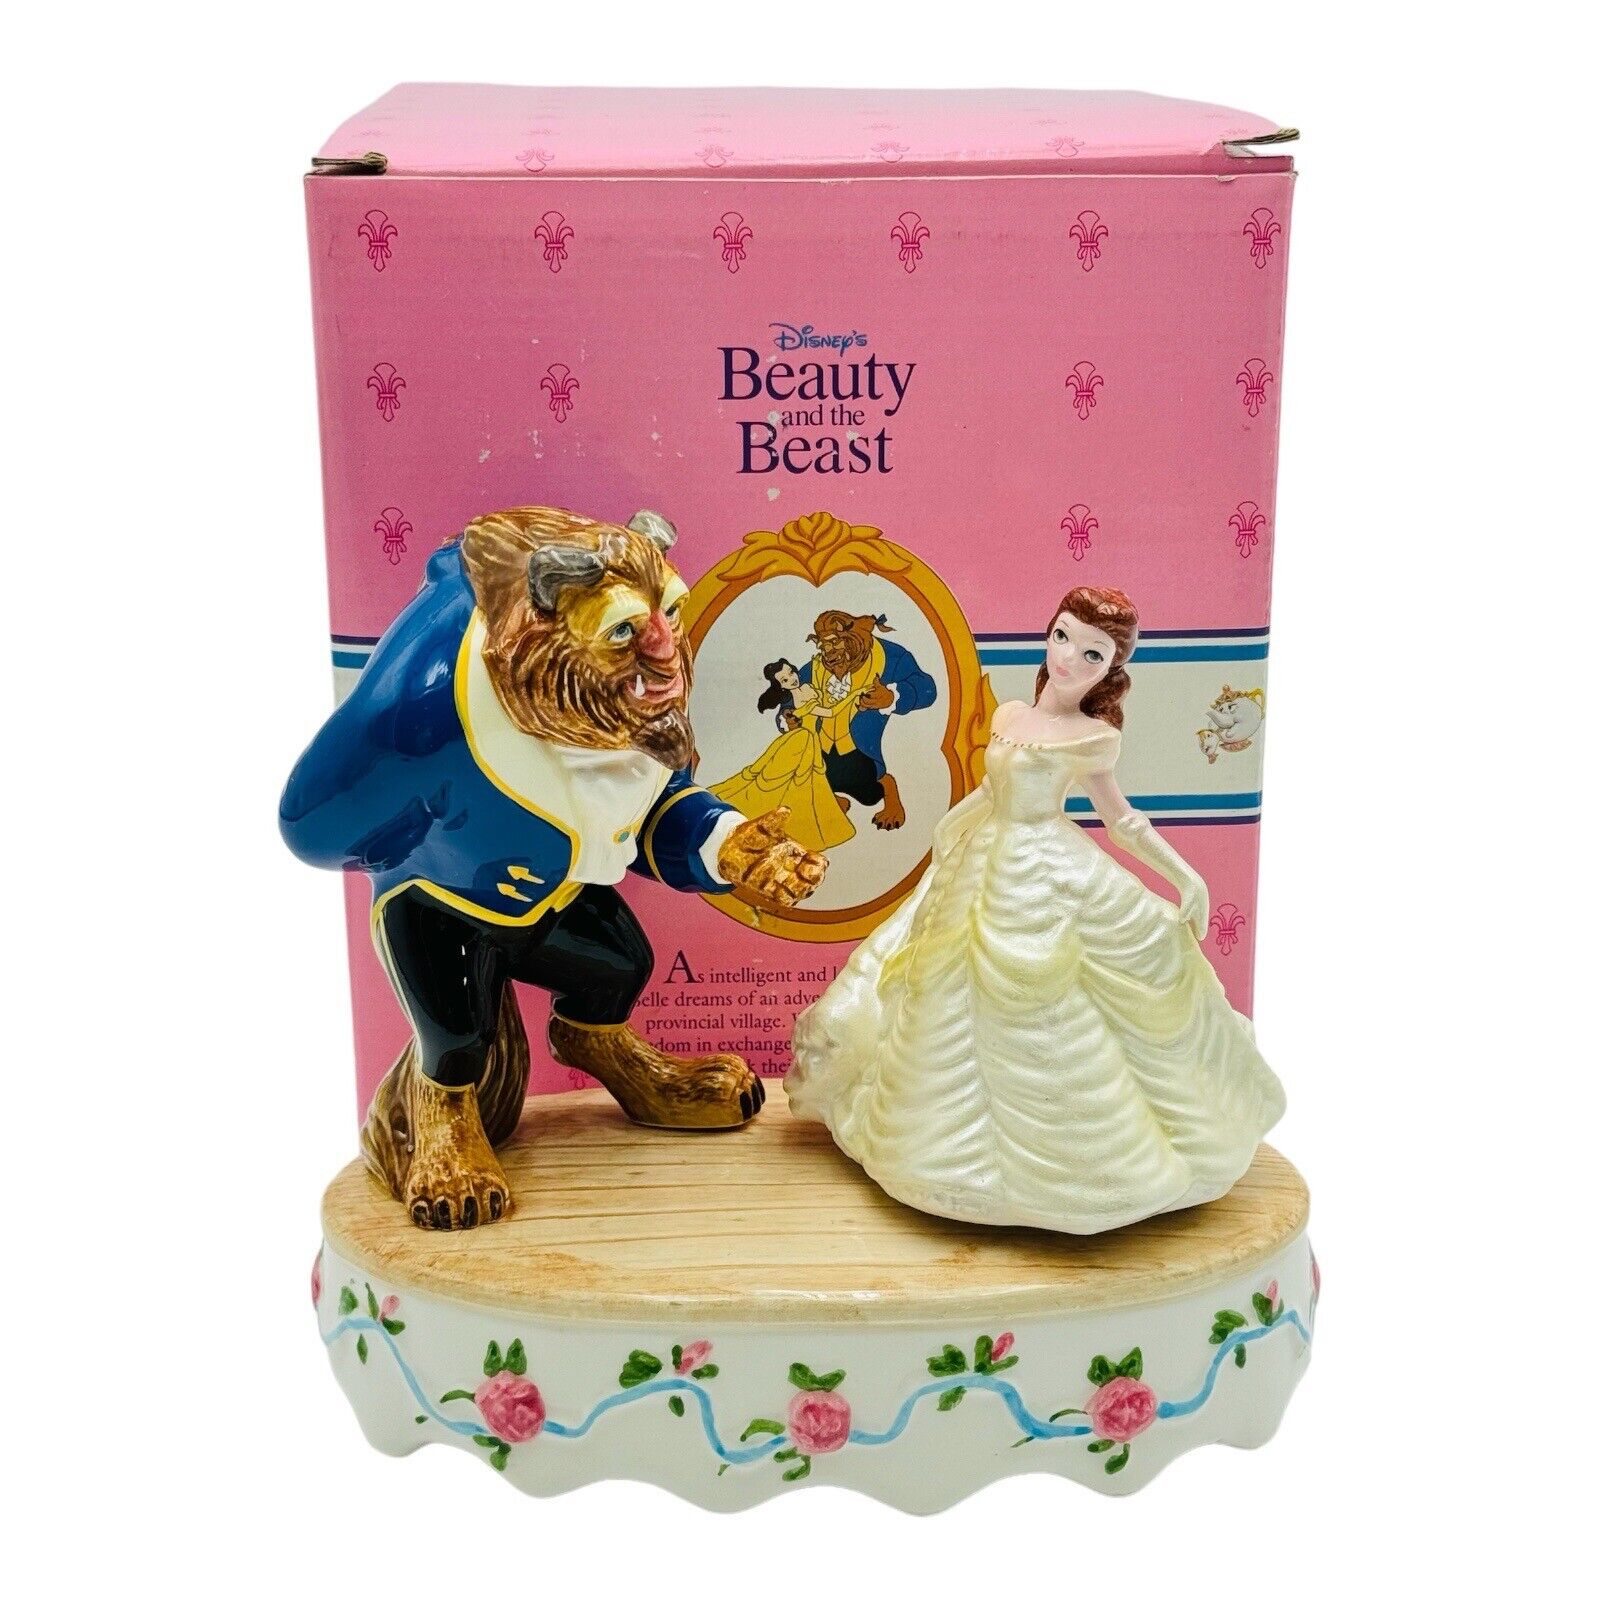 Schmid Disney’s Beauty And The Beast Music Box Dancing Belle NEW IN BOX